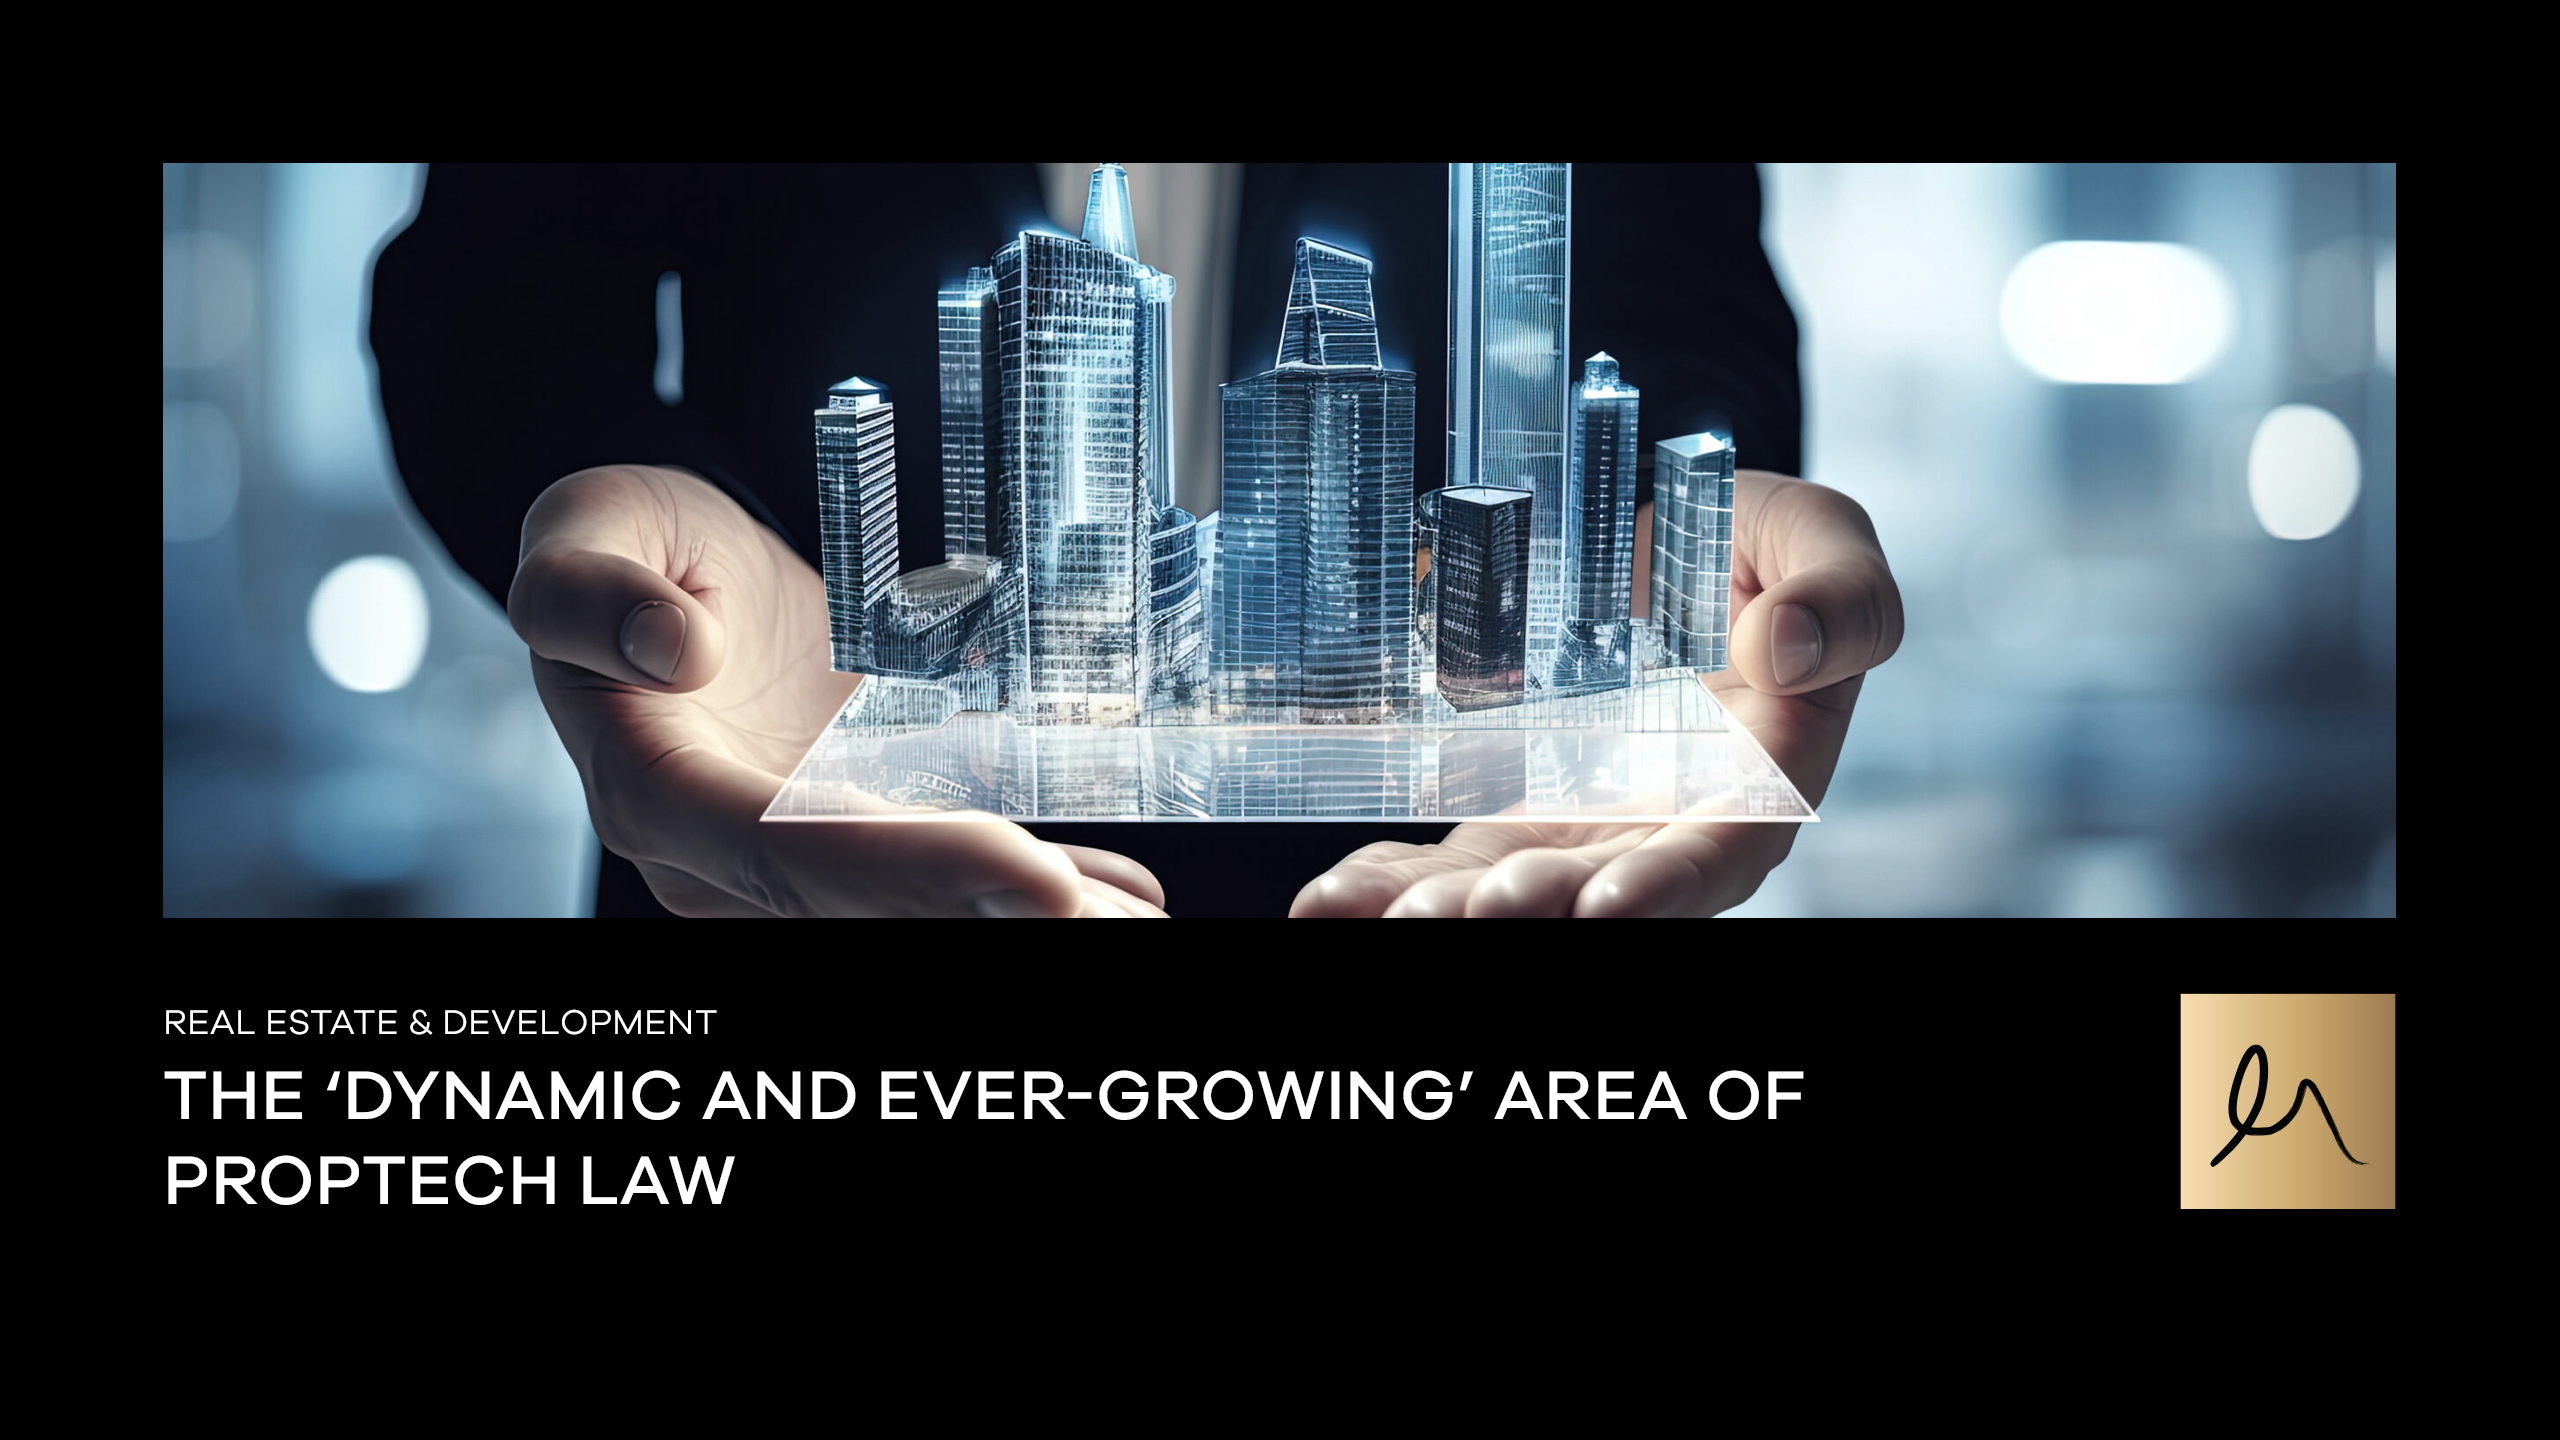 The ‘dynamic and ever-growing’ area of proptech law